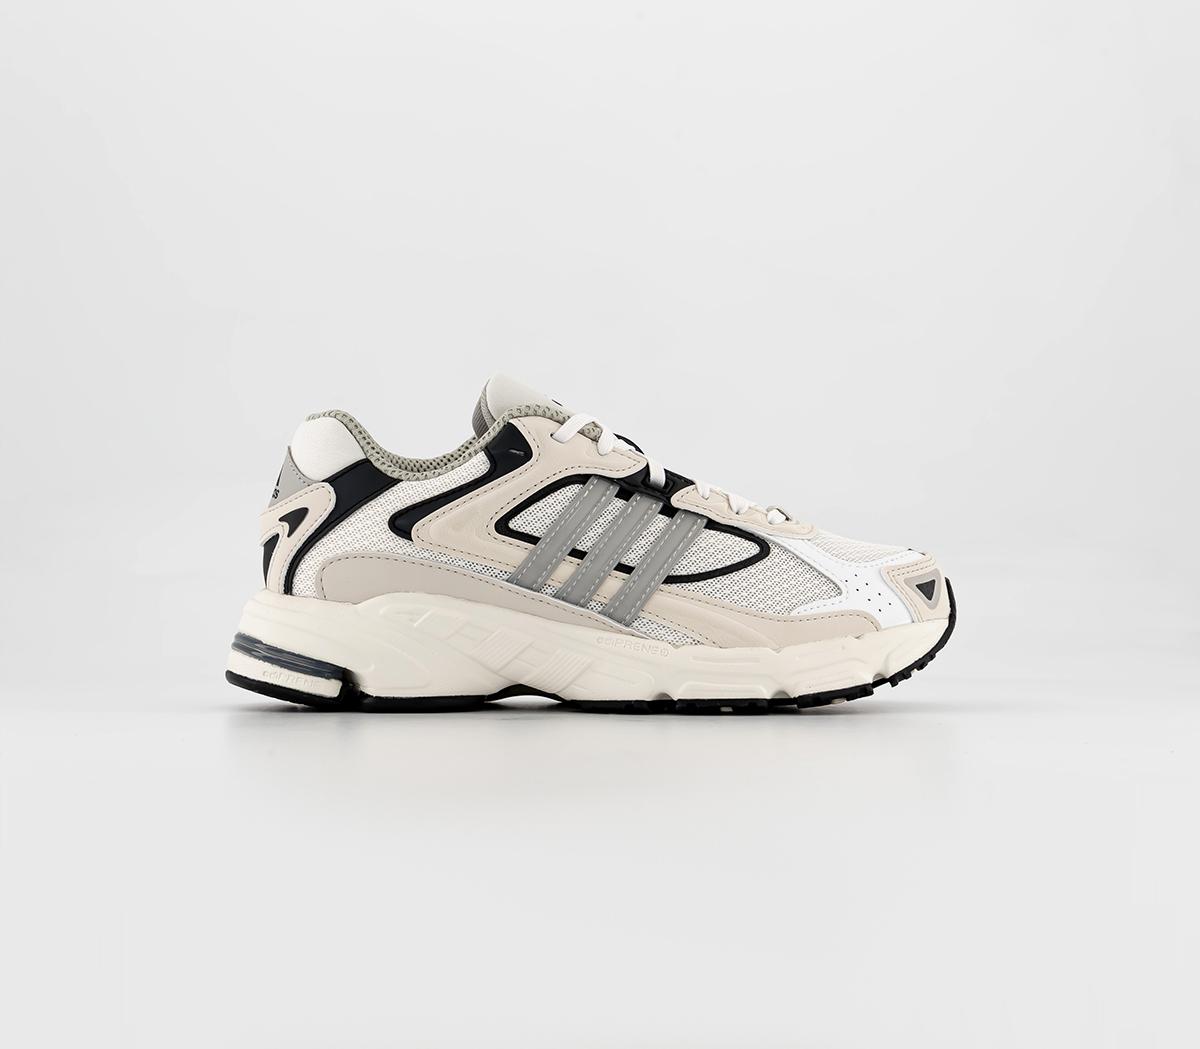 adidas Cl Trainers Chalk White Clear Brown Chalk White - Women's Trainers